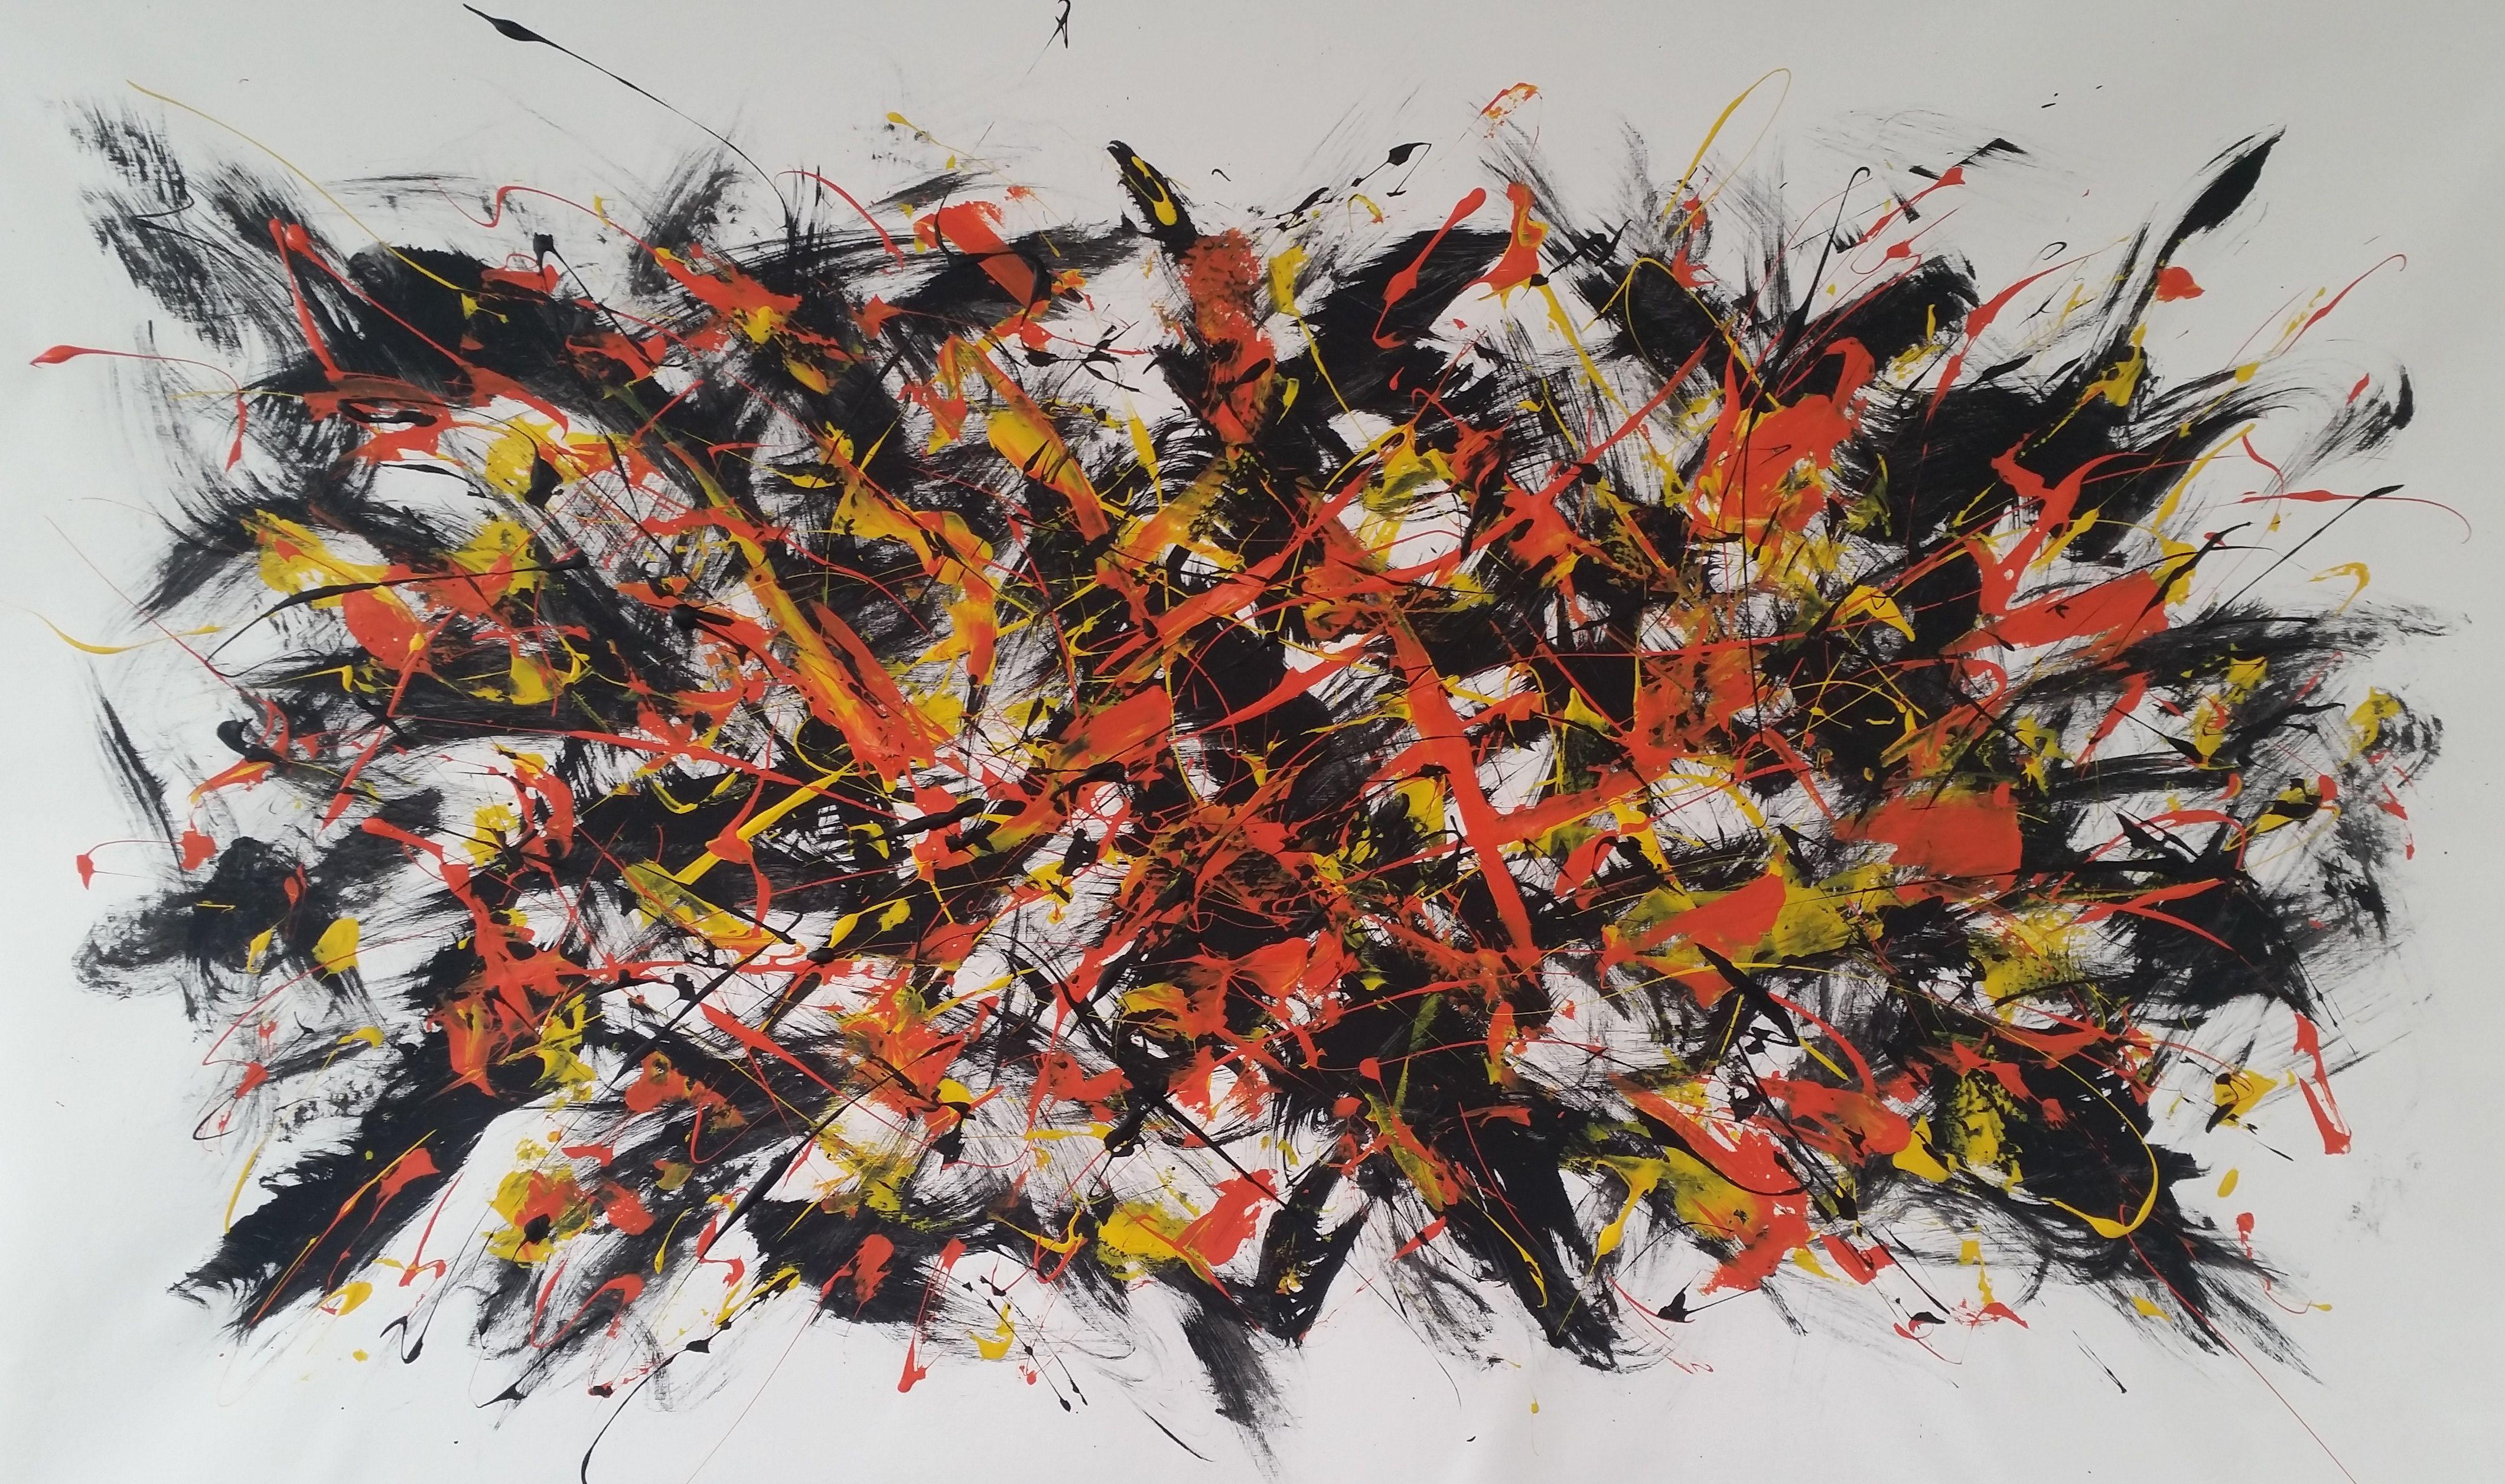 Max Yaskin Abstract Painting - ACRYLIC PAINTING on CANVAS by M.Y., Painting, Acrylic on Canvas